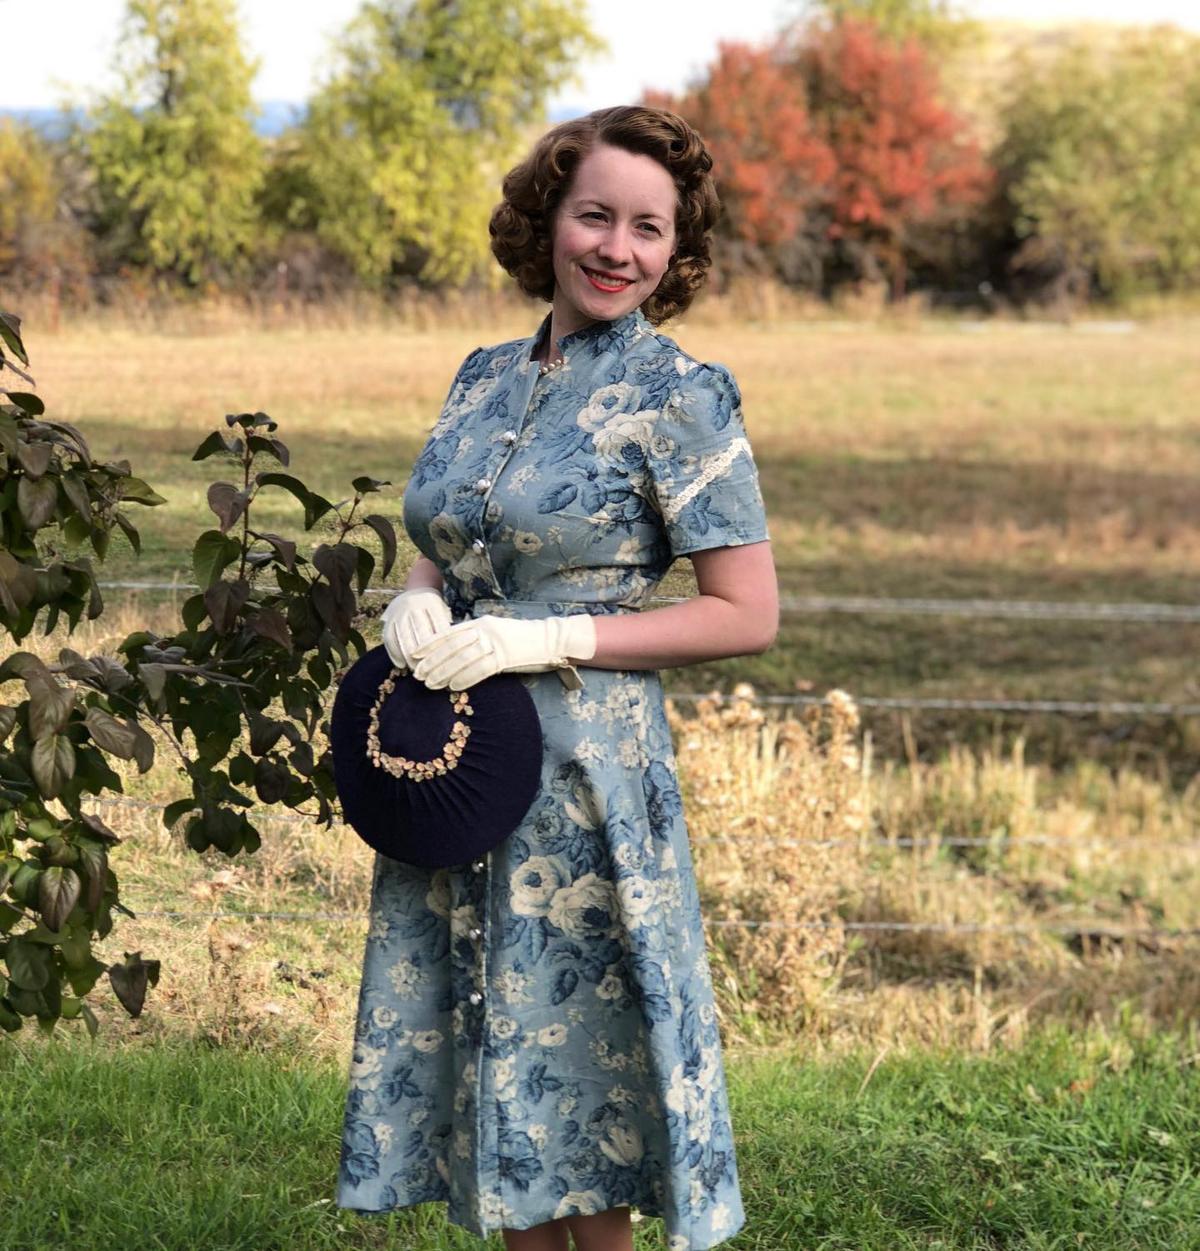 Mrs. Clay has been a freelance crochet designer for 13 years, designing hundreds of patterns for yarn companies and crochet magazines. (Courtesy of <a href="https://www.instagram.com/verityvintagestudio/?g=5">Kristen Clay</a>)